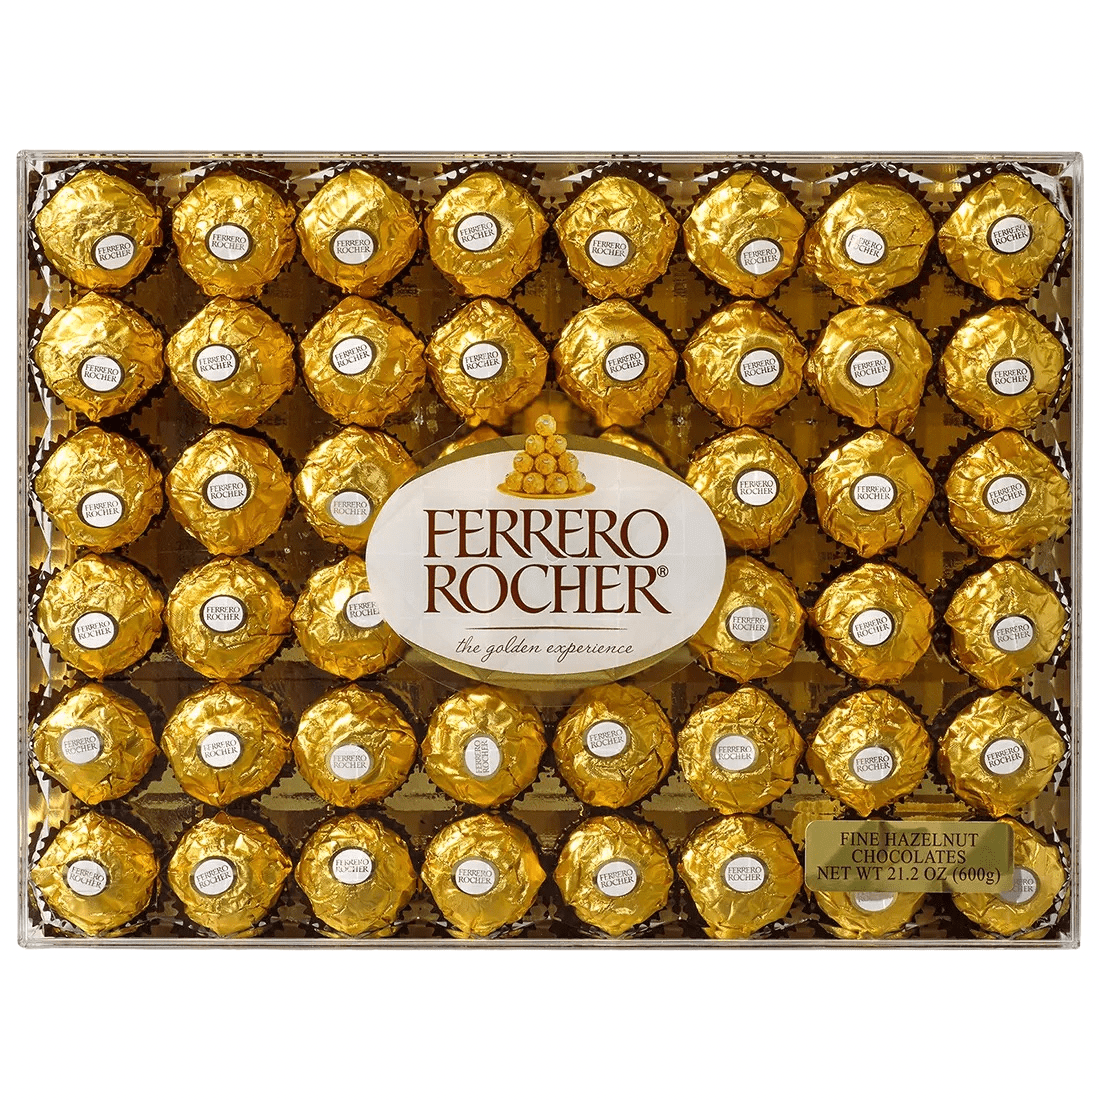 
A tempting combination of smooth chocolaty cream surrounding a whole hazelnut within a delicate, crisp wafer all enveloped in milk chocolate and finely chopped hazelnuts
A deliciously elegant confection, wrapped in glittery gold foil, loved, gifted, and appreciated all over the world
For your most special holiday moments, a generously extravagant gift of Ferrero Rocher